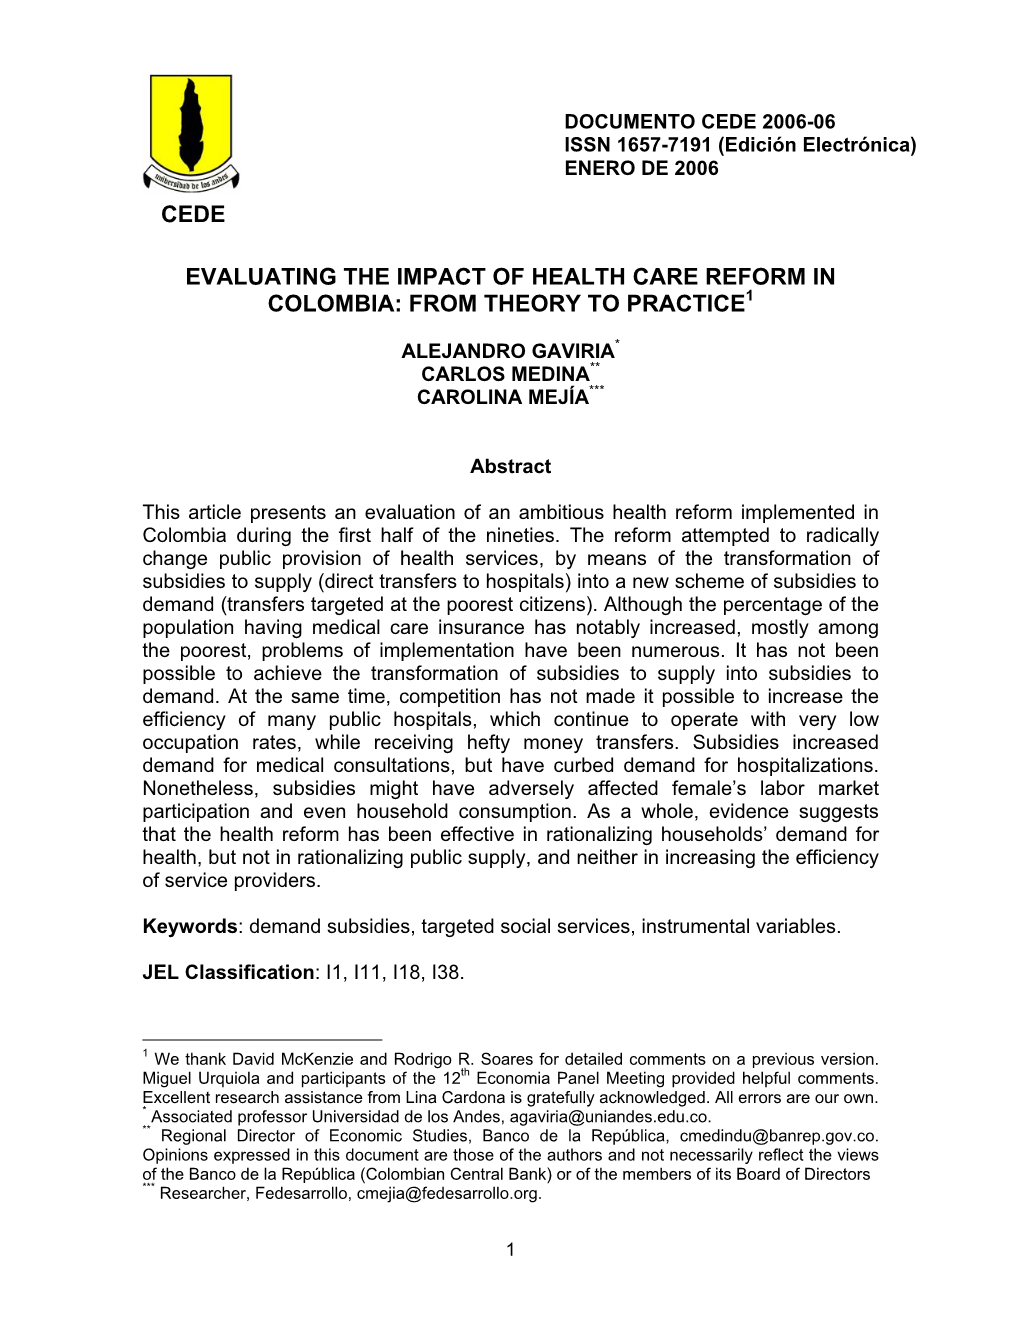 Evaluating the Impact of Health Care Reform in Colombia: from Theory to Practice1